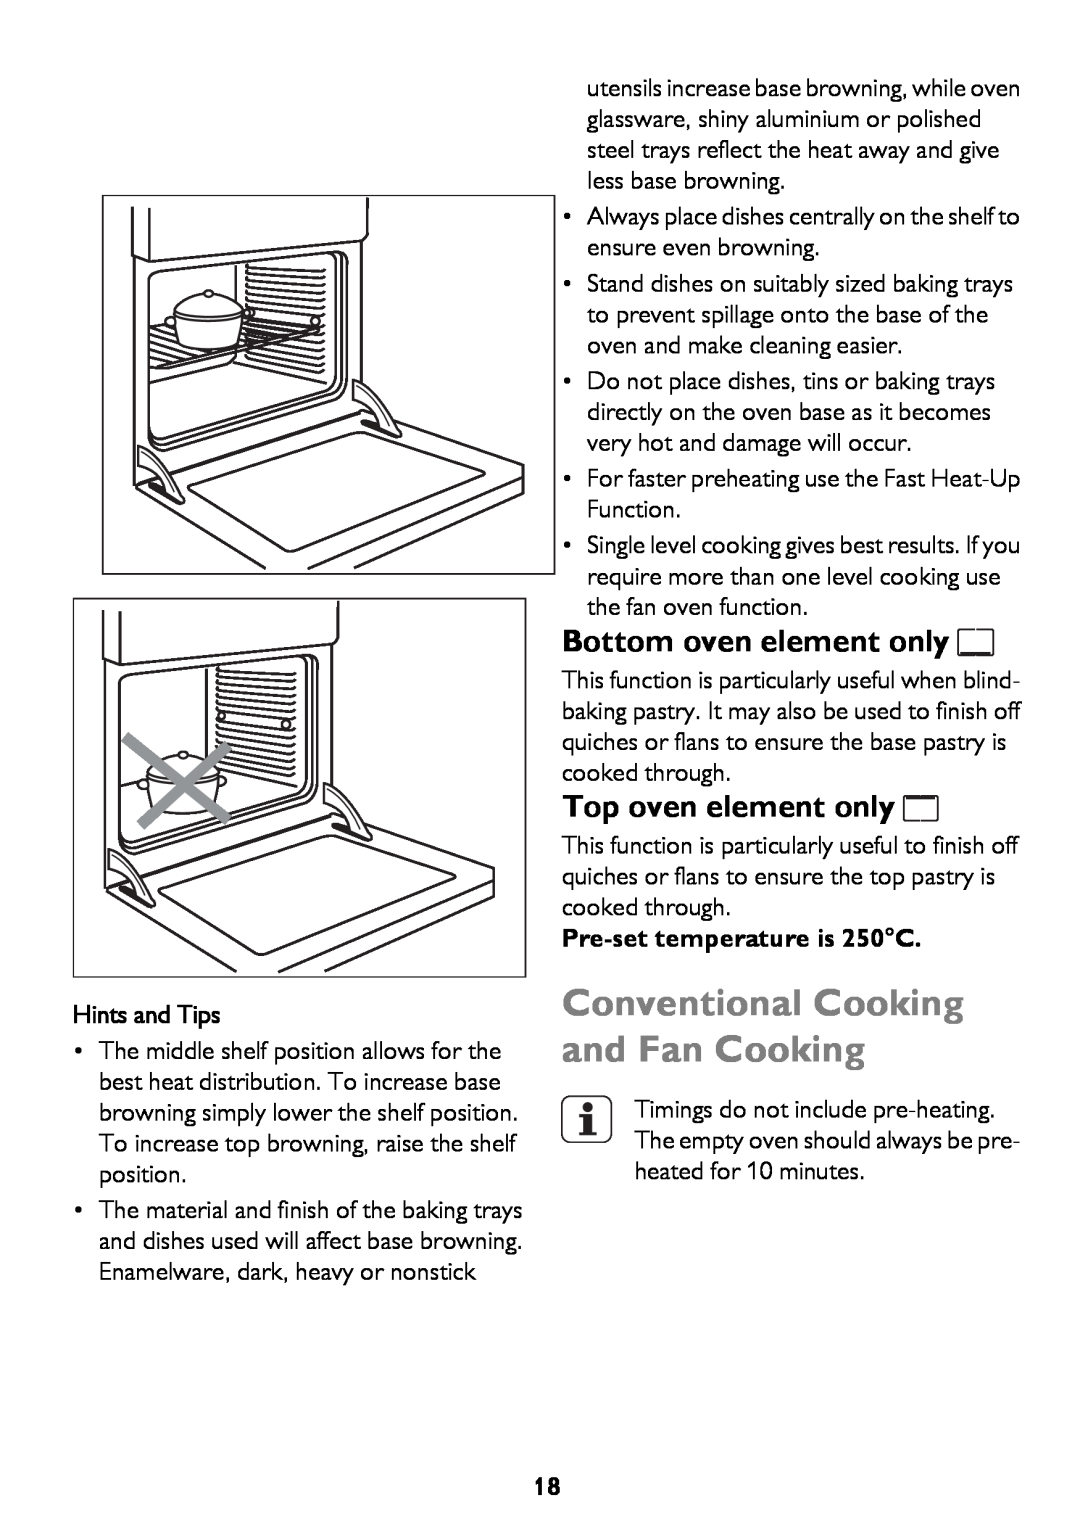 John Lewis JLBIOS662 Conventional Cooking and Fan Cooking, Bottom oven element only, Top oven element only, Hints and Tips 